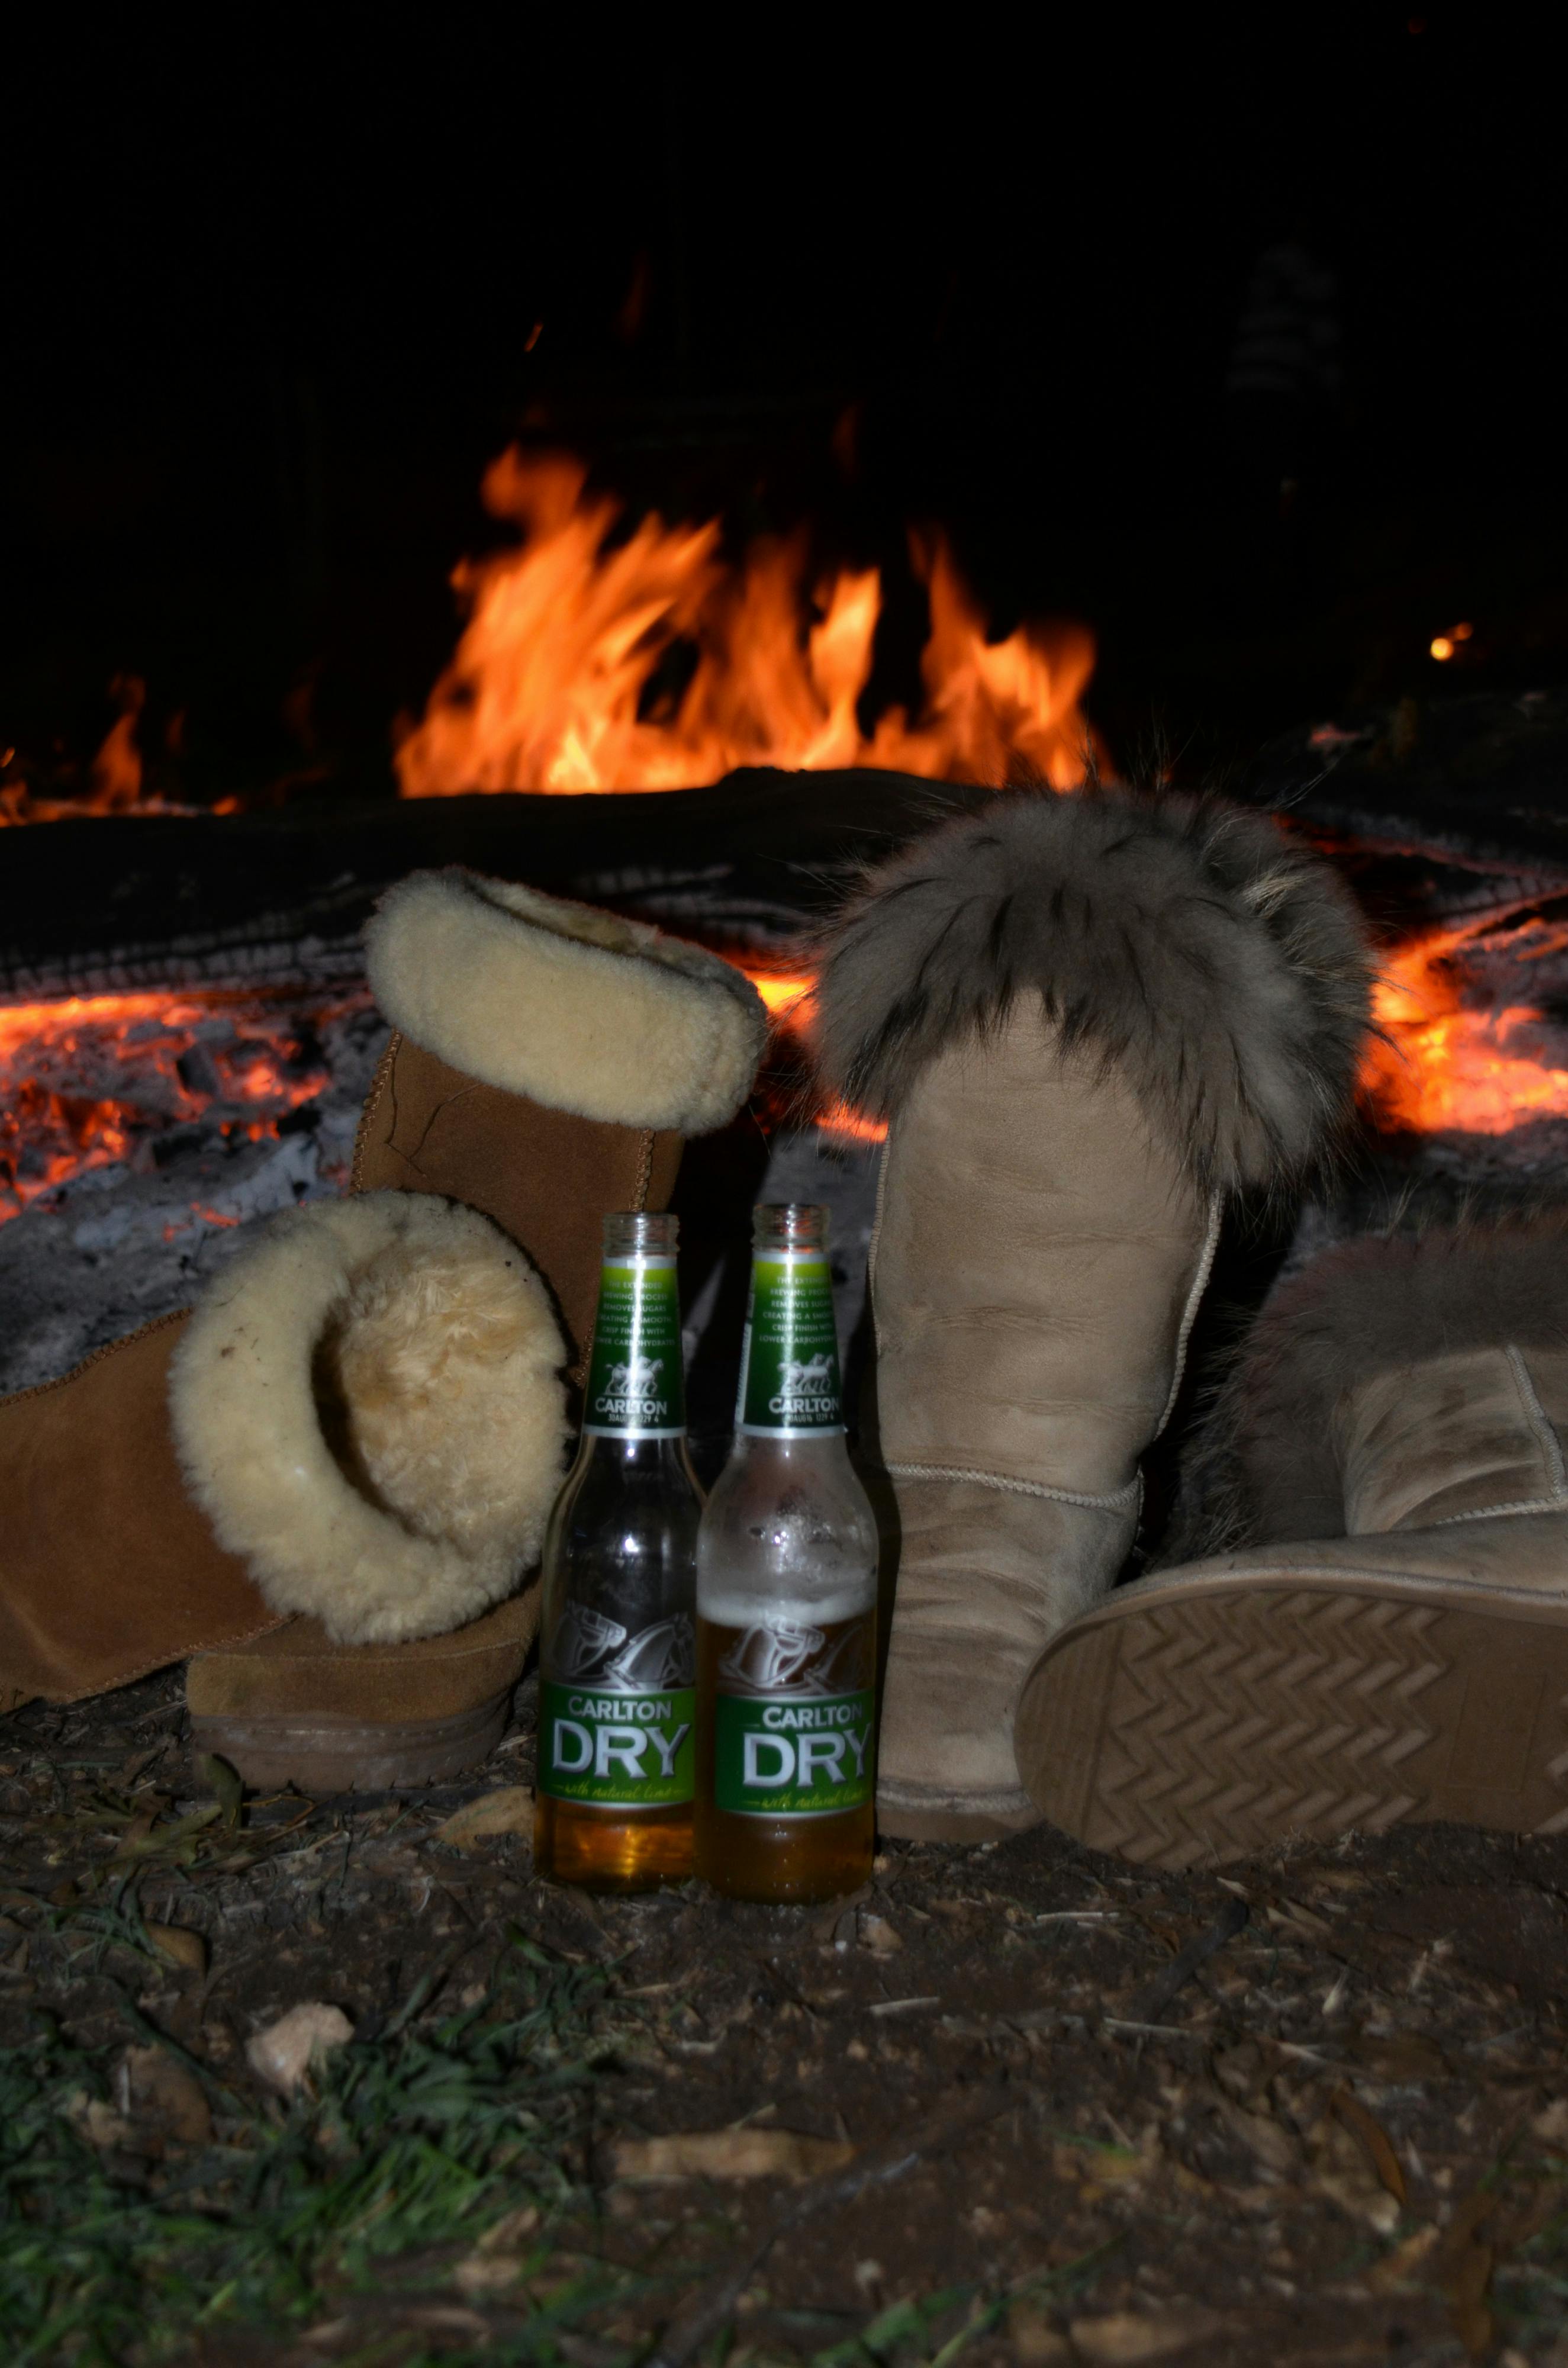 Free stock photo of beer, fire, uggboots